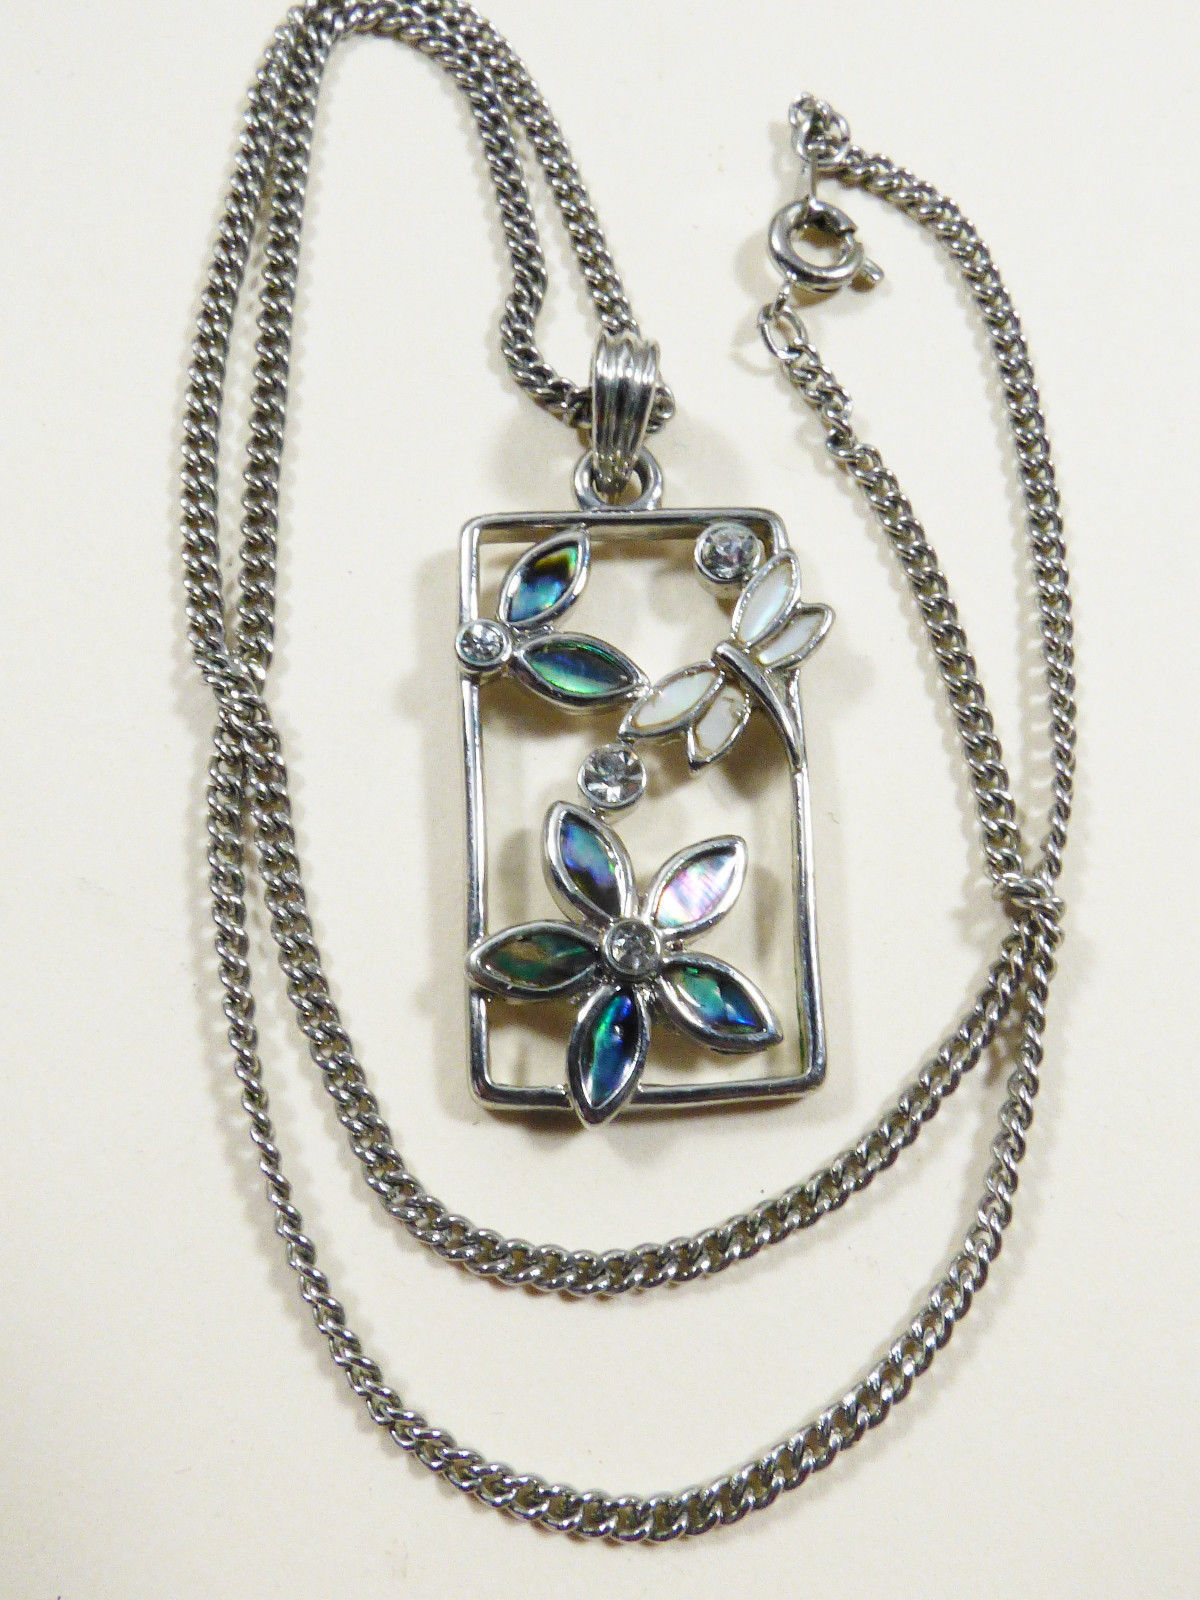 Silver tone metal link necklace Abalone Shell Crystal pendant Flower pendant - $20.79